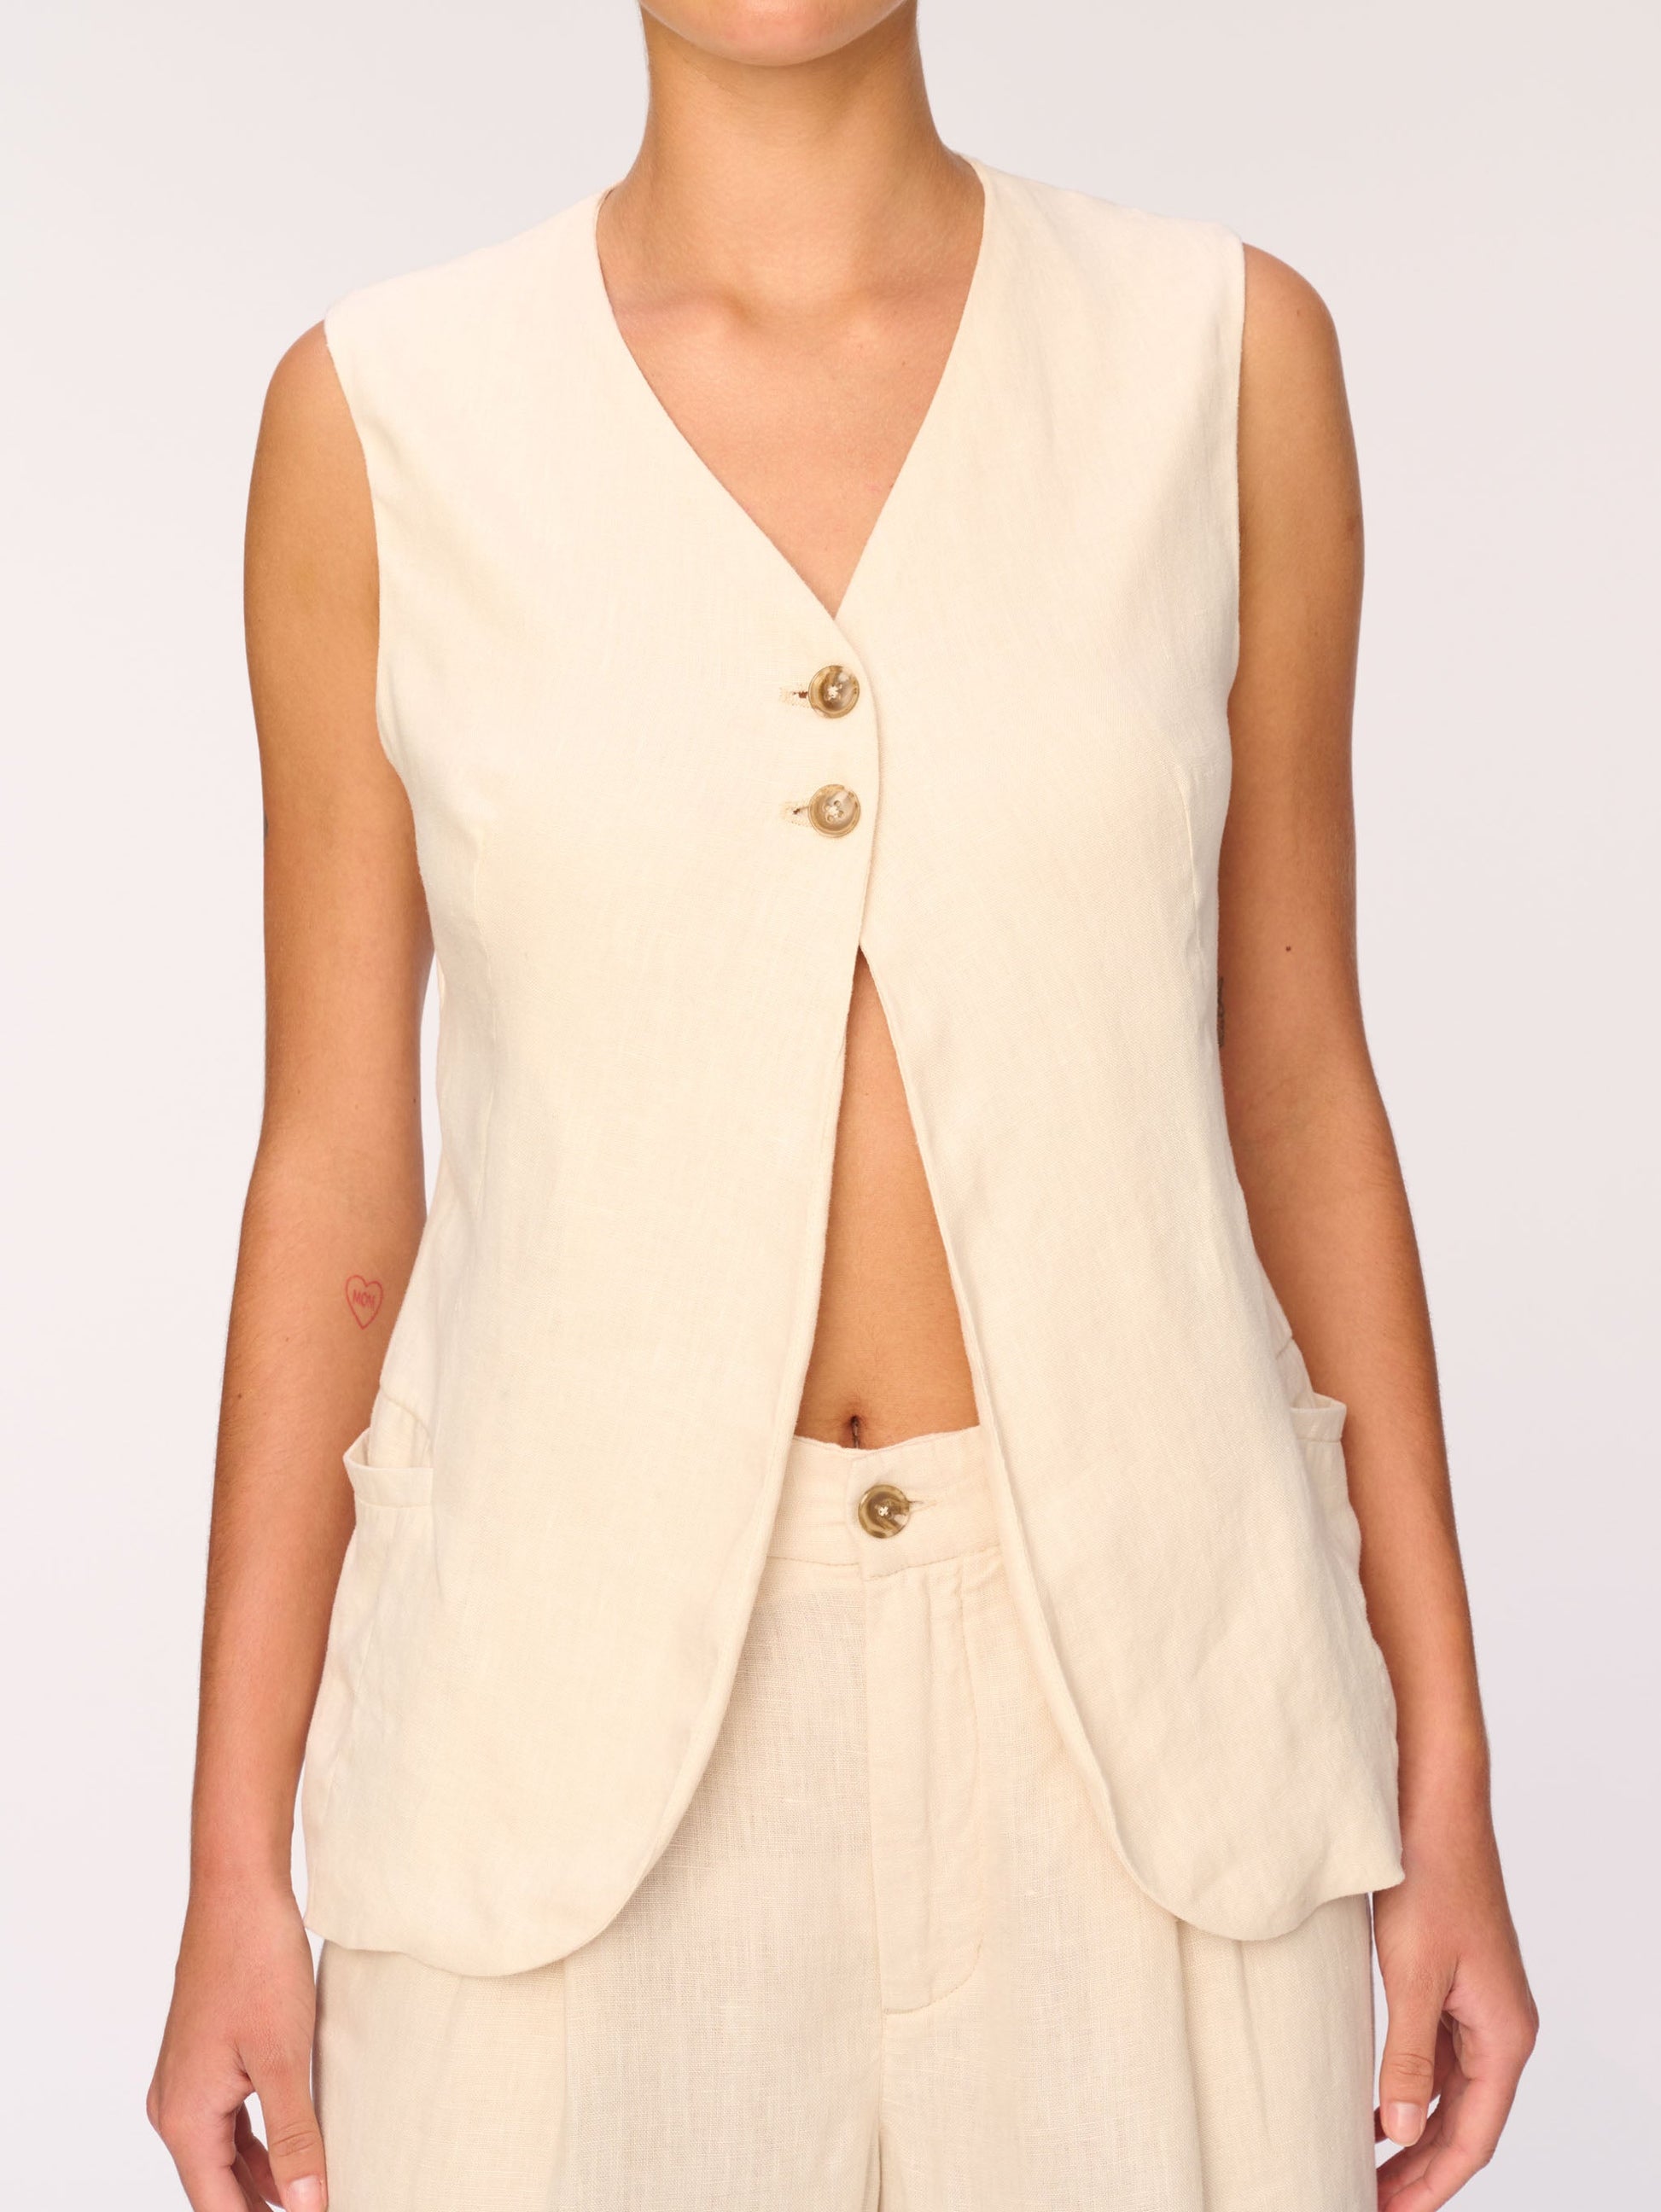 NTG Fad TOP Apricot / S Sleeveless V-neck two-button long vest-（Hand Made）